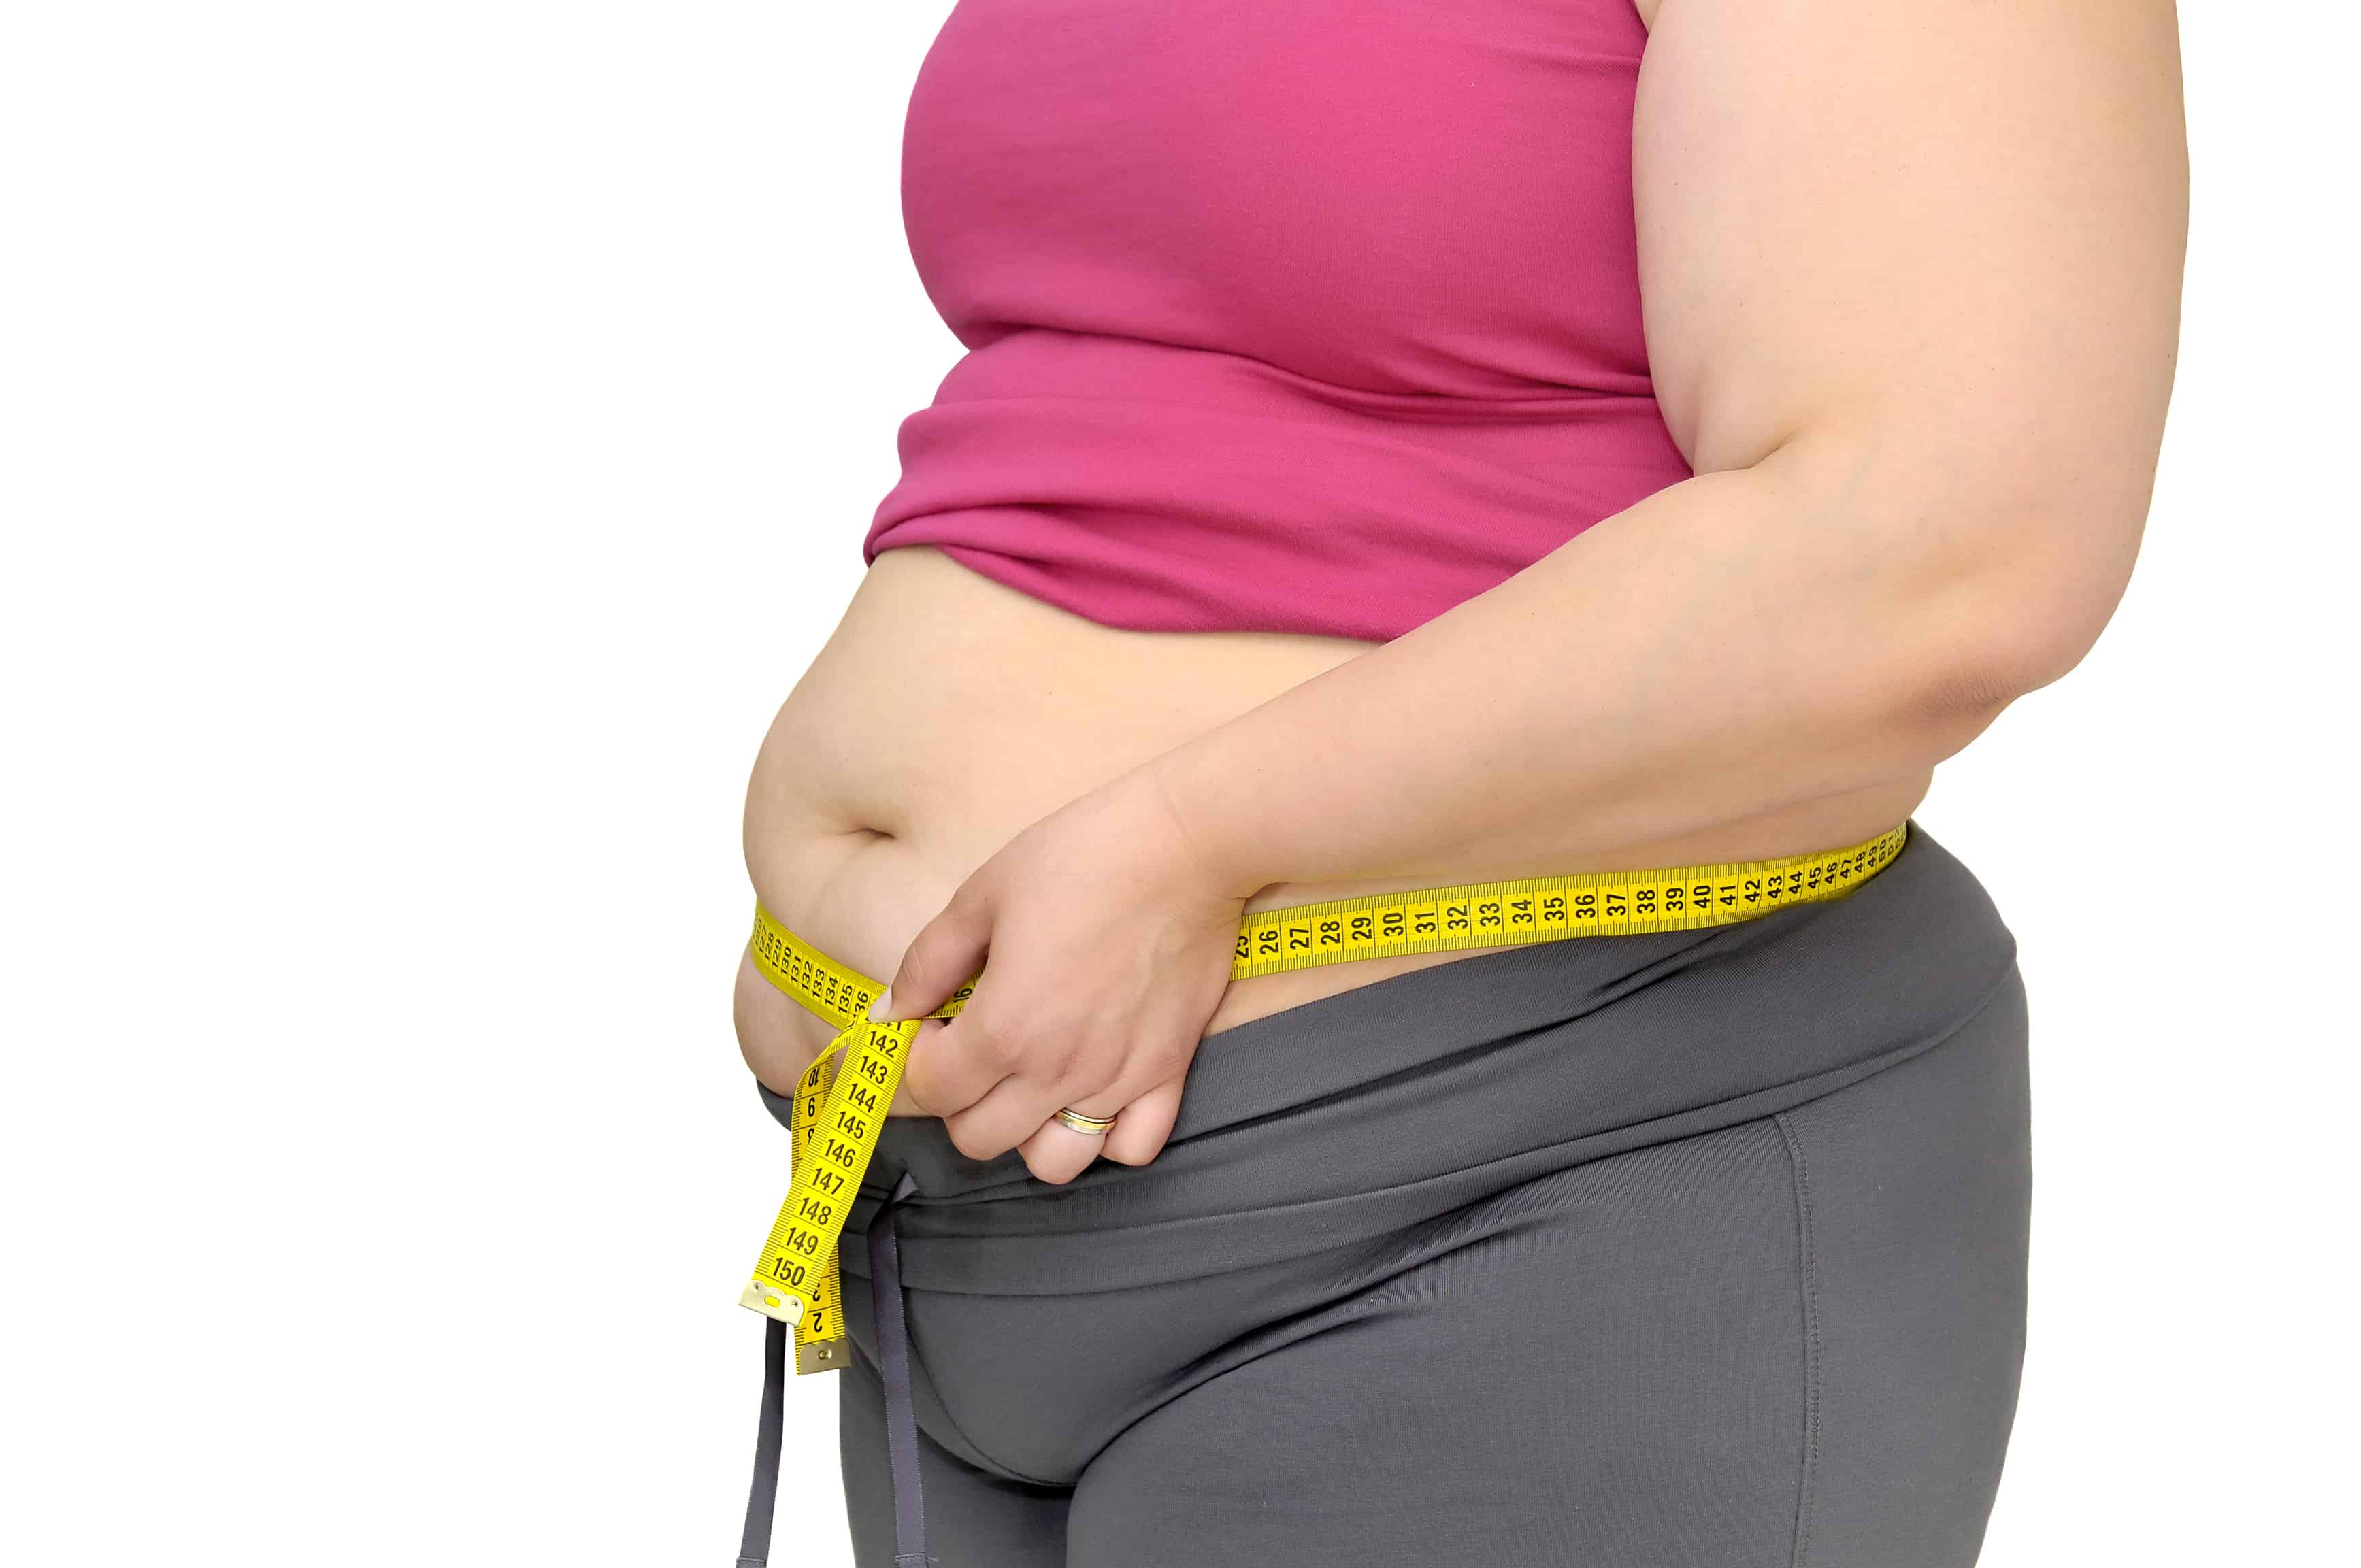 Bypass Surgery to Lose Weight